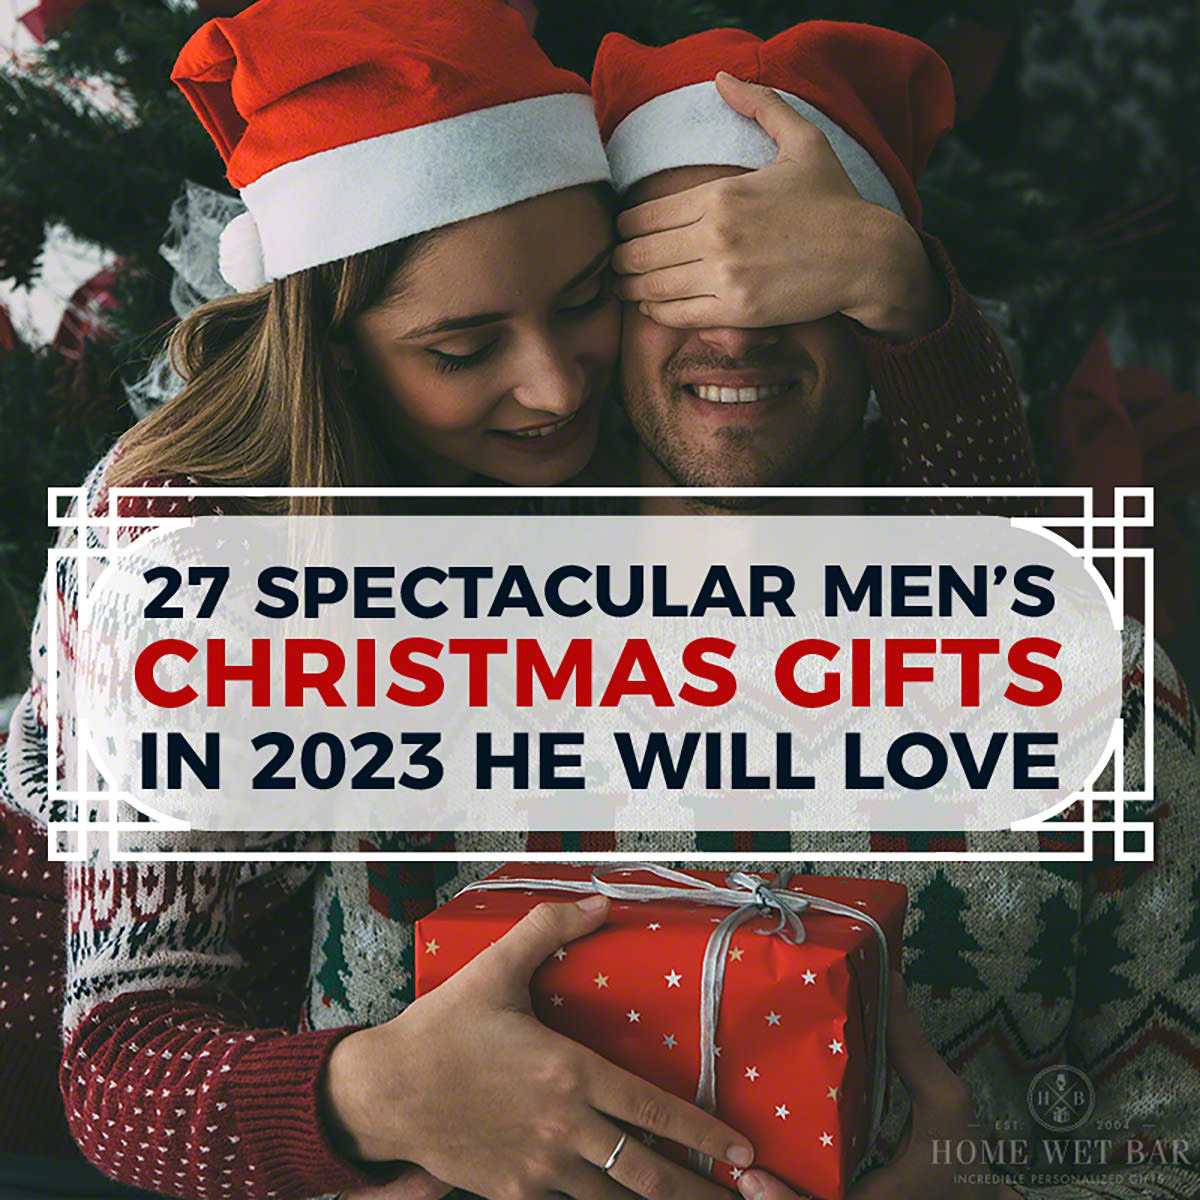 27 Cute Christmas Gift Ideas For Him And Her | Zoosk